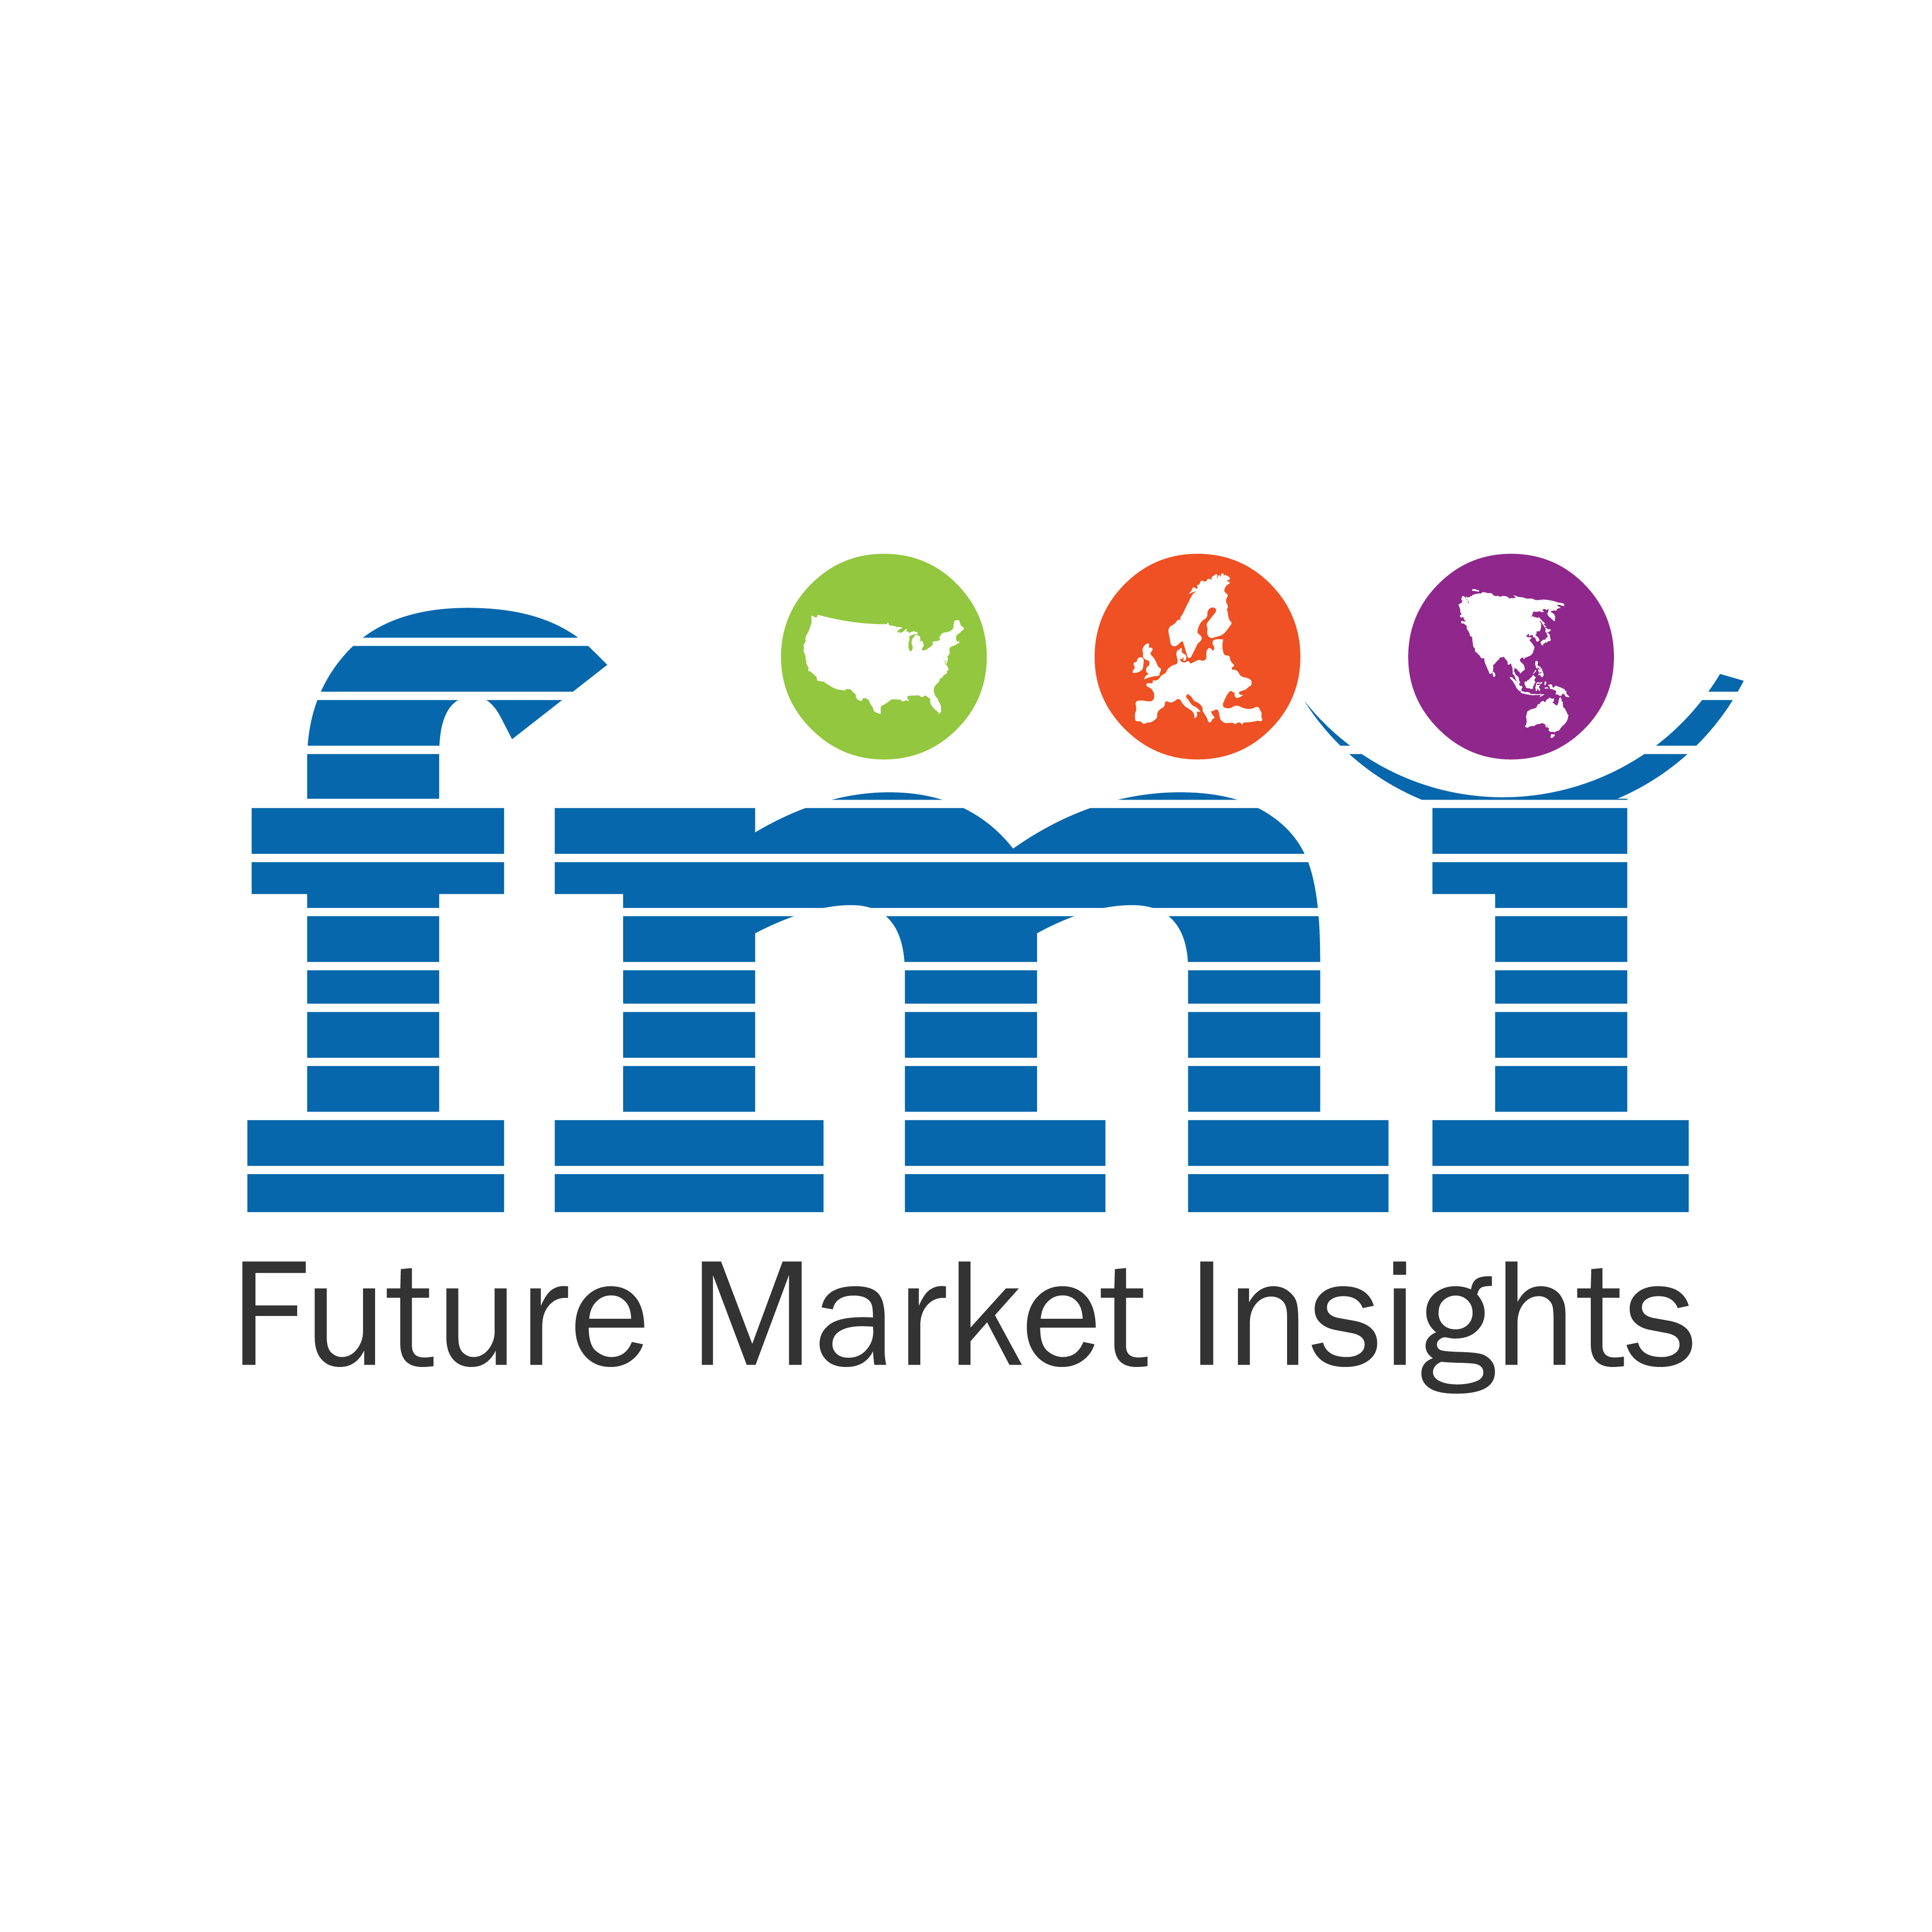 Future Market Insights, Inc., Monday, May 8, 2023, Press release picture